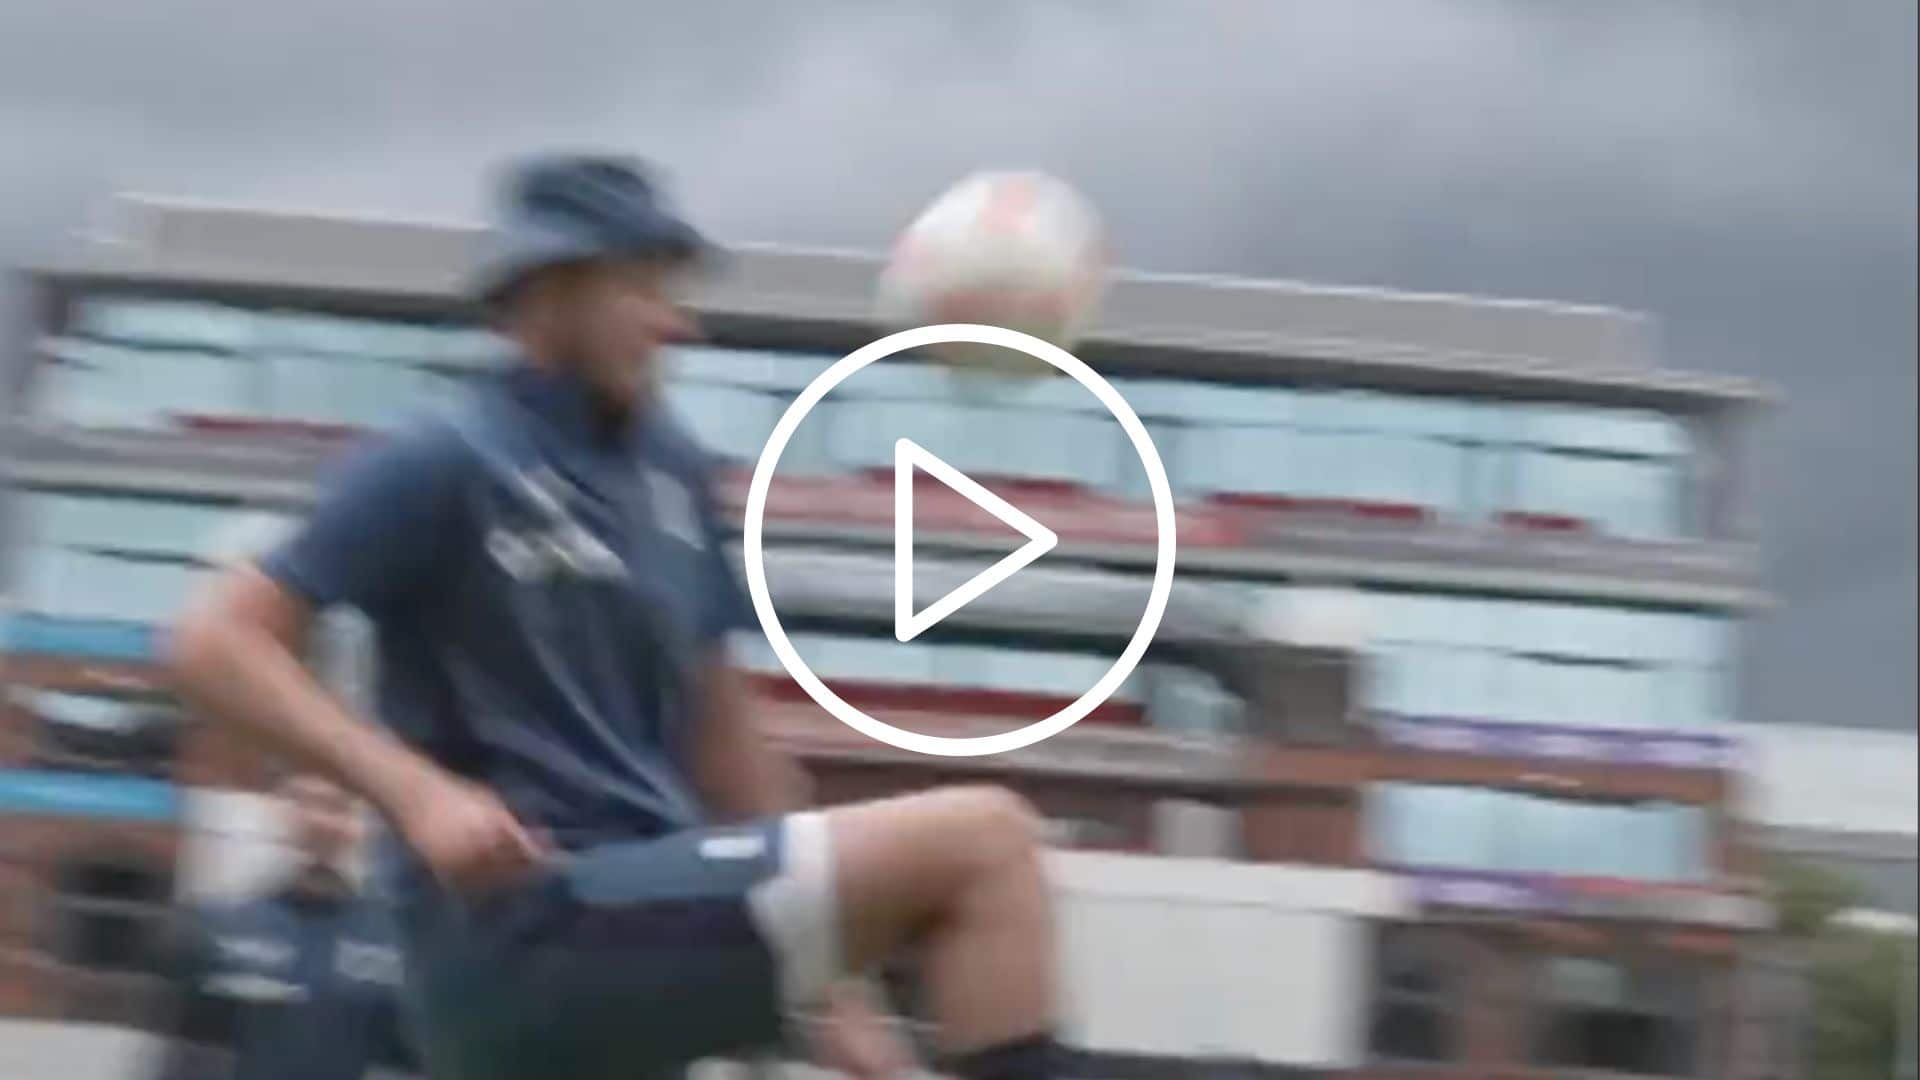 [Watch] Stuart Broad Kicks Football Into Own Face Ahead Of Old Trafford Test